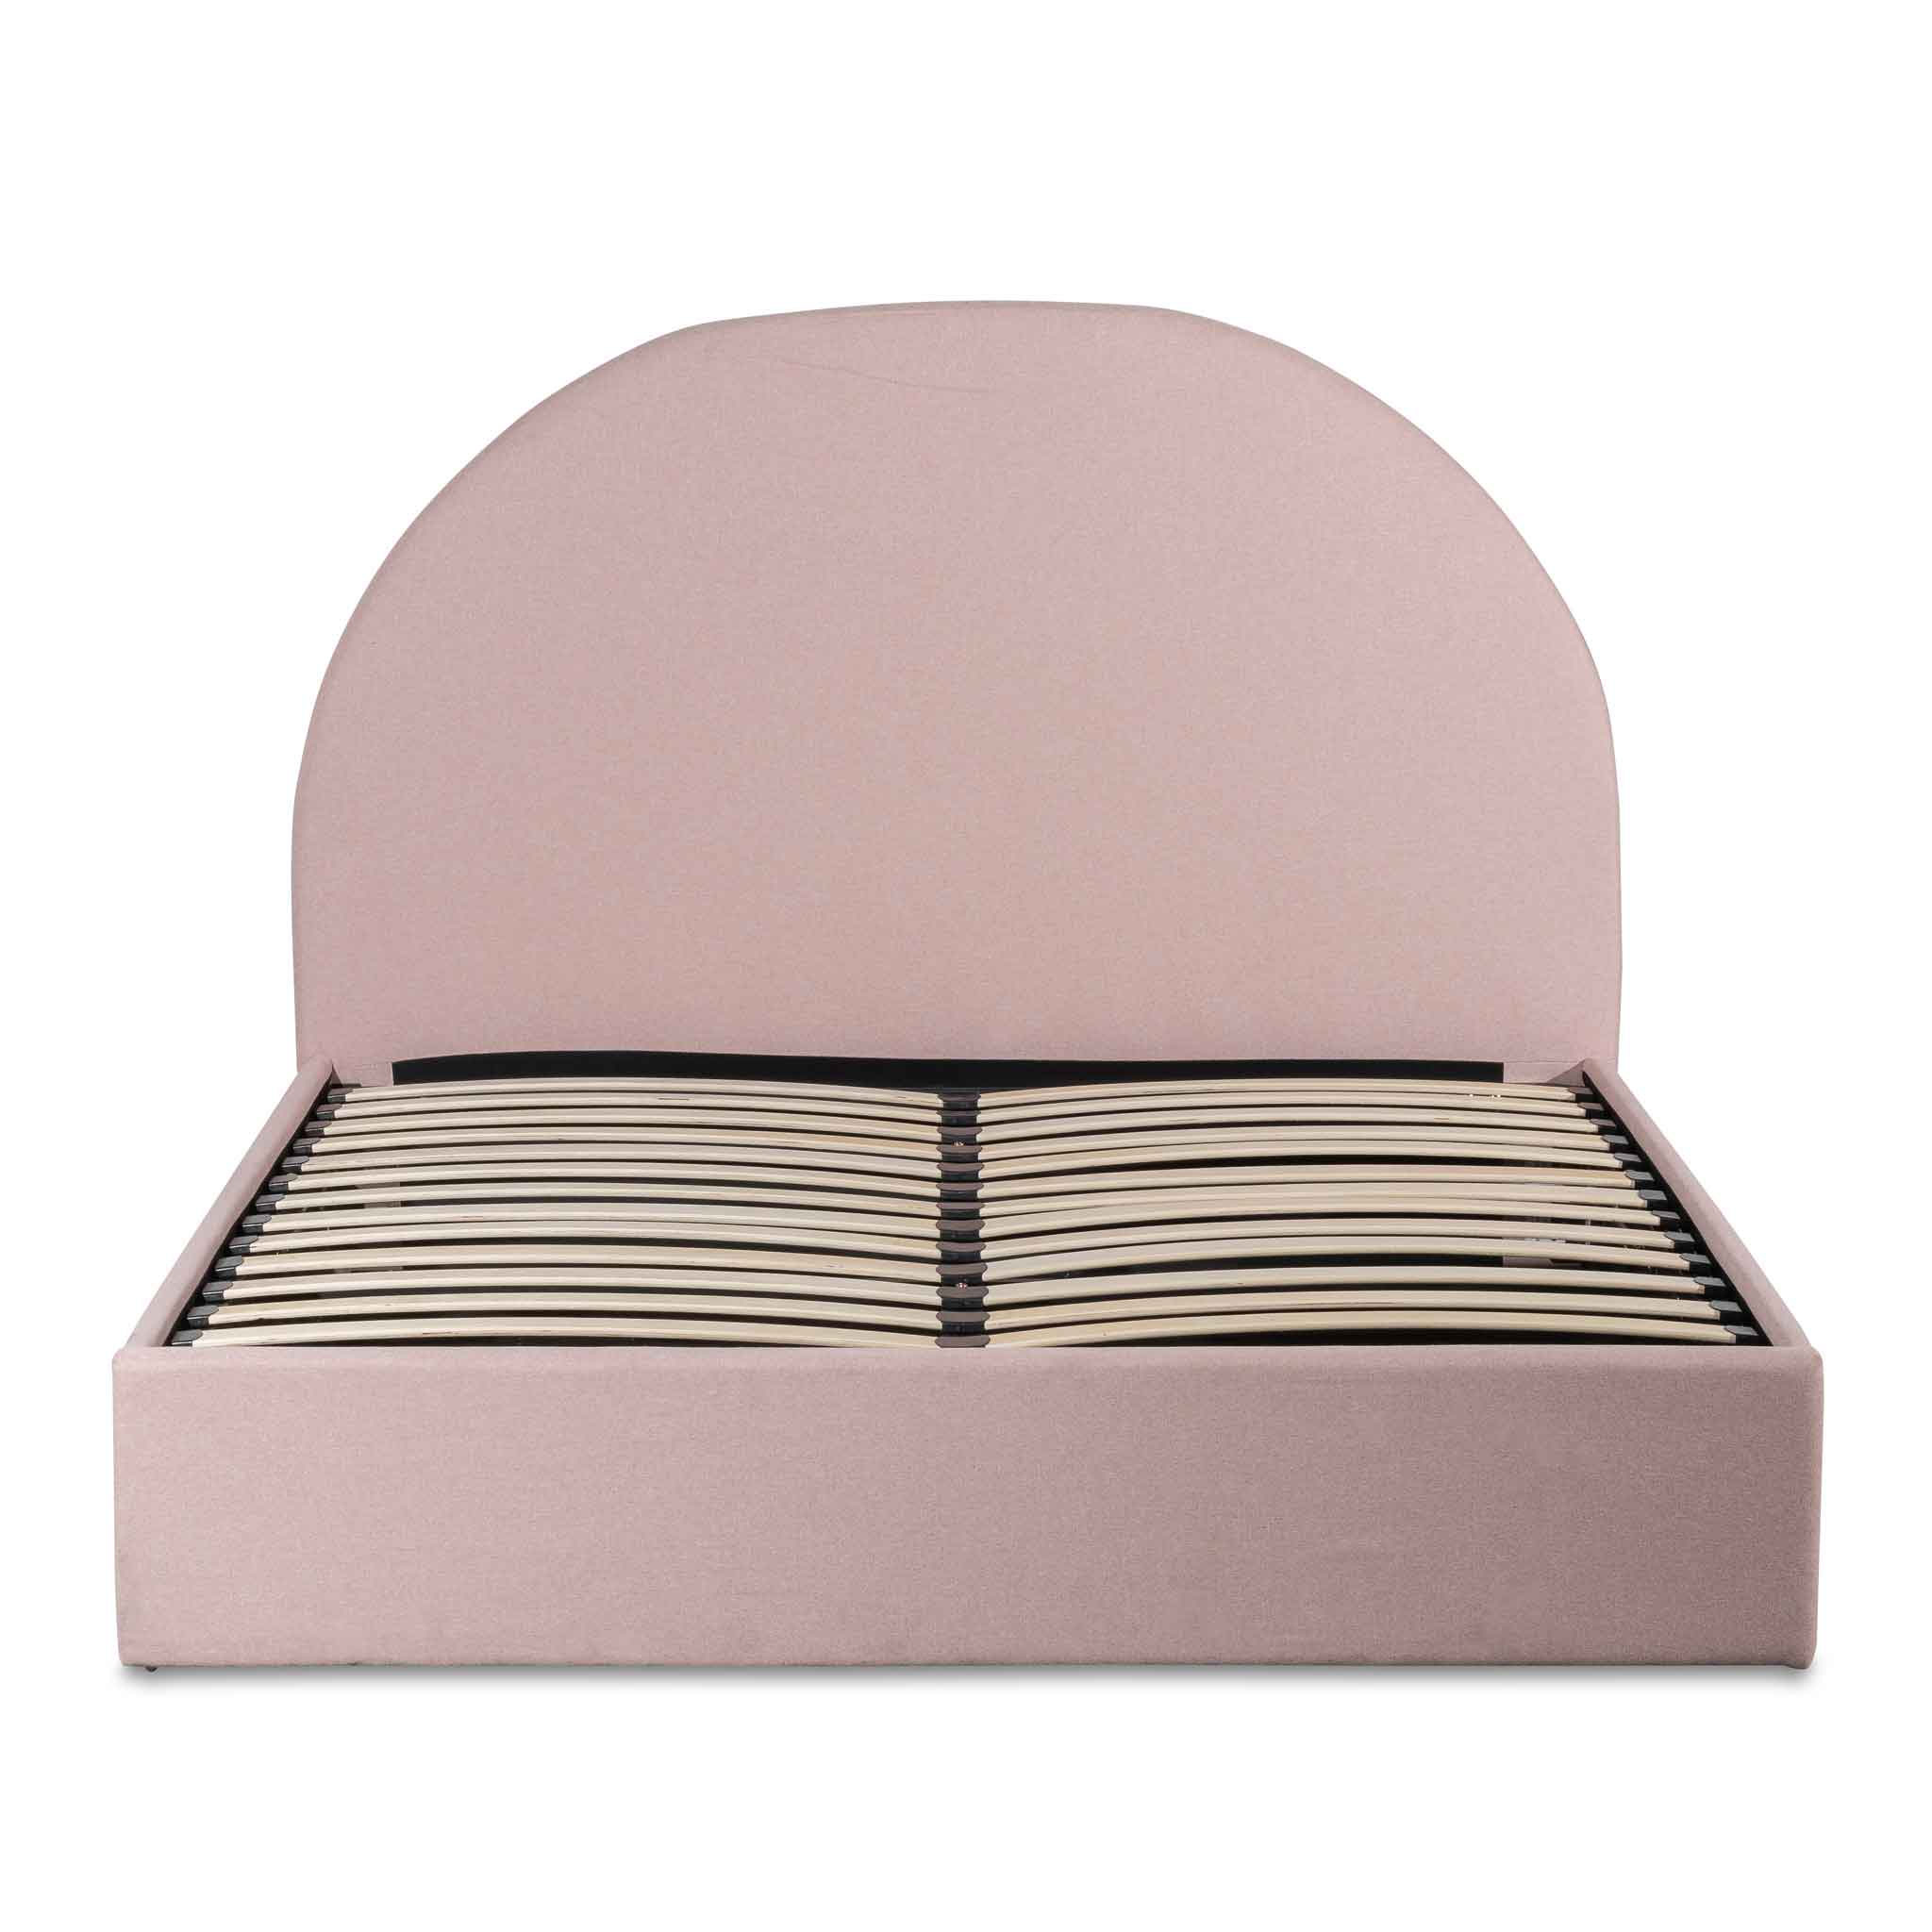 Maximus Queen Bed Frame - Blush Pink - Beds